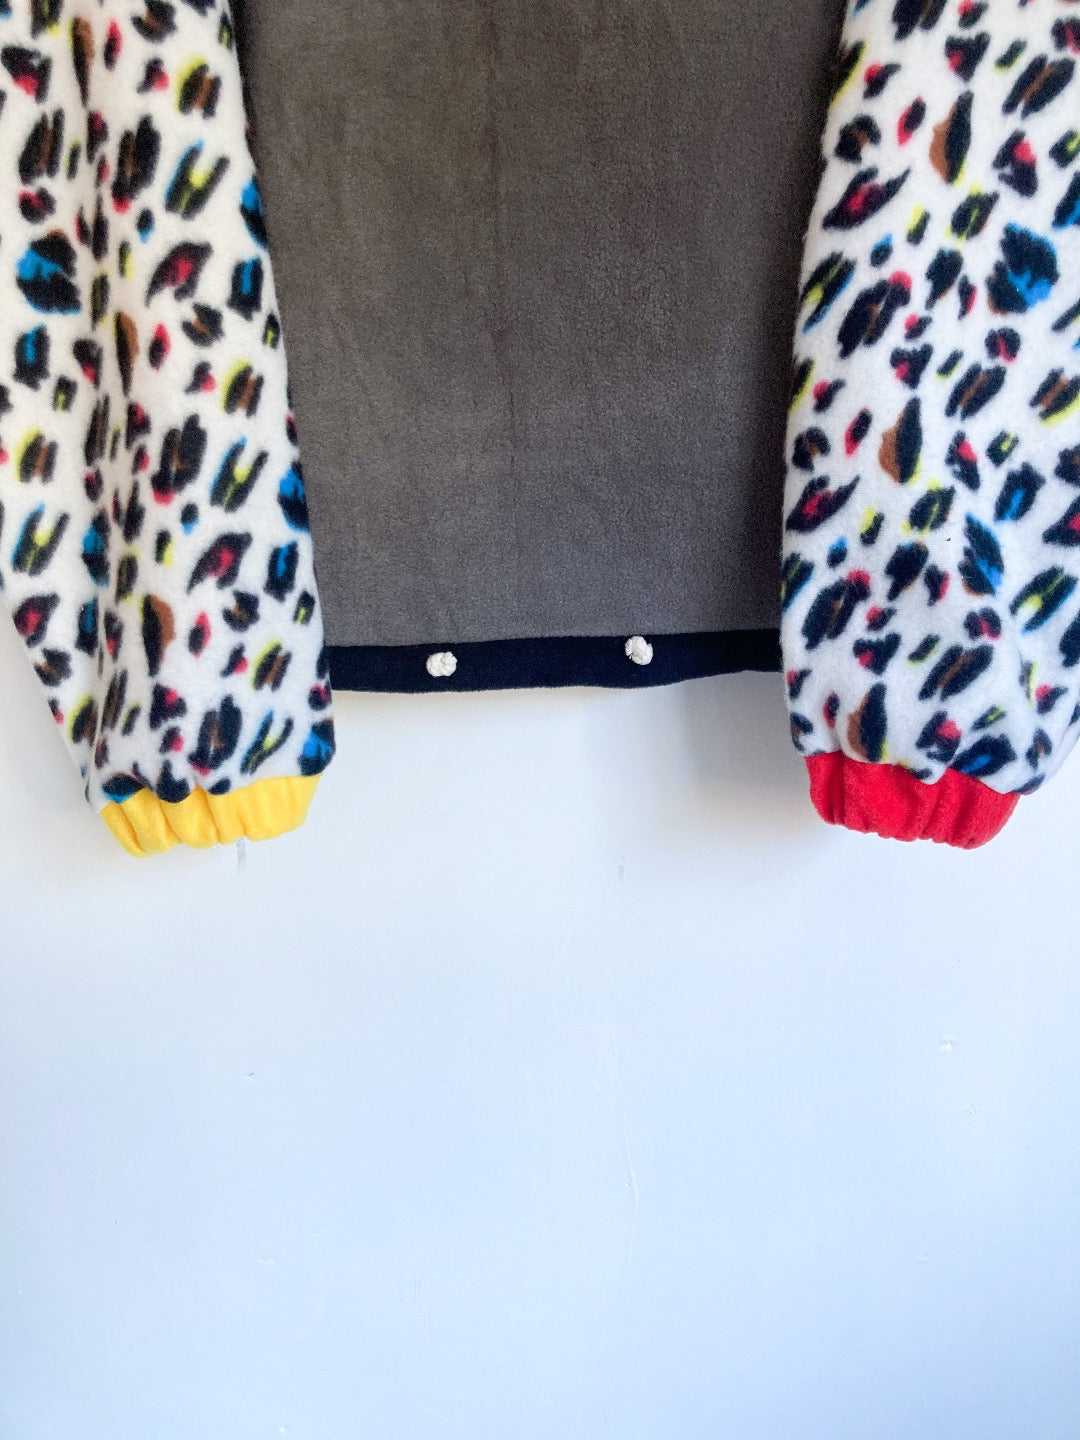 Grey fleece with black trim, white leopard print sleeves and alternate yellow and red cuffs. 